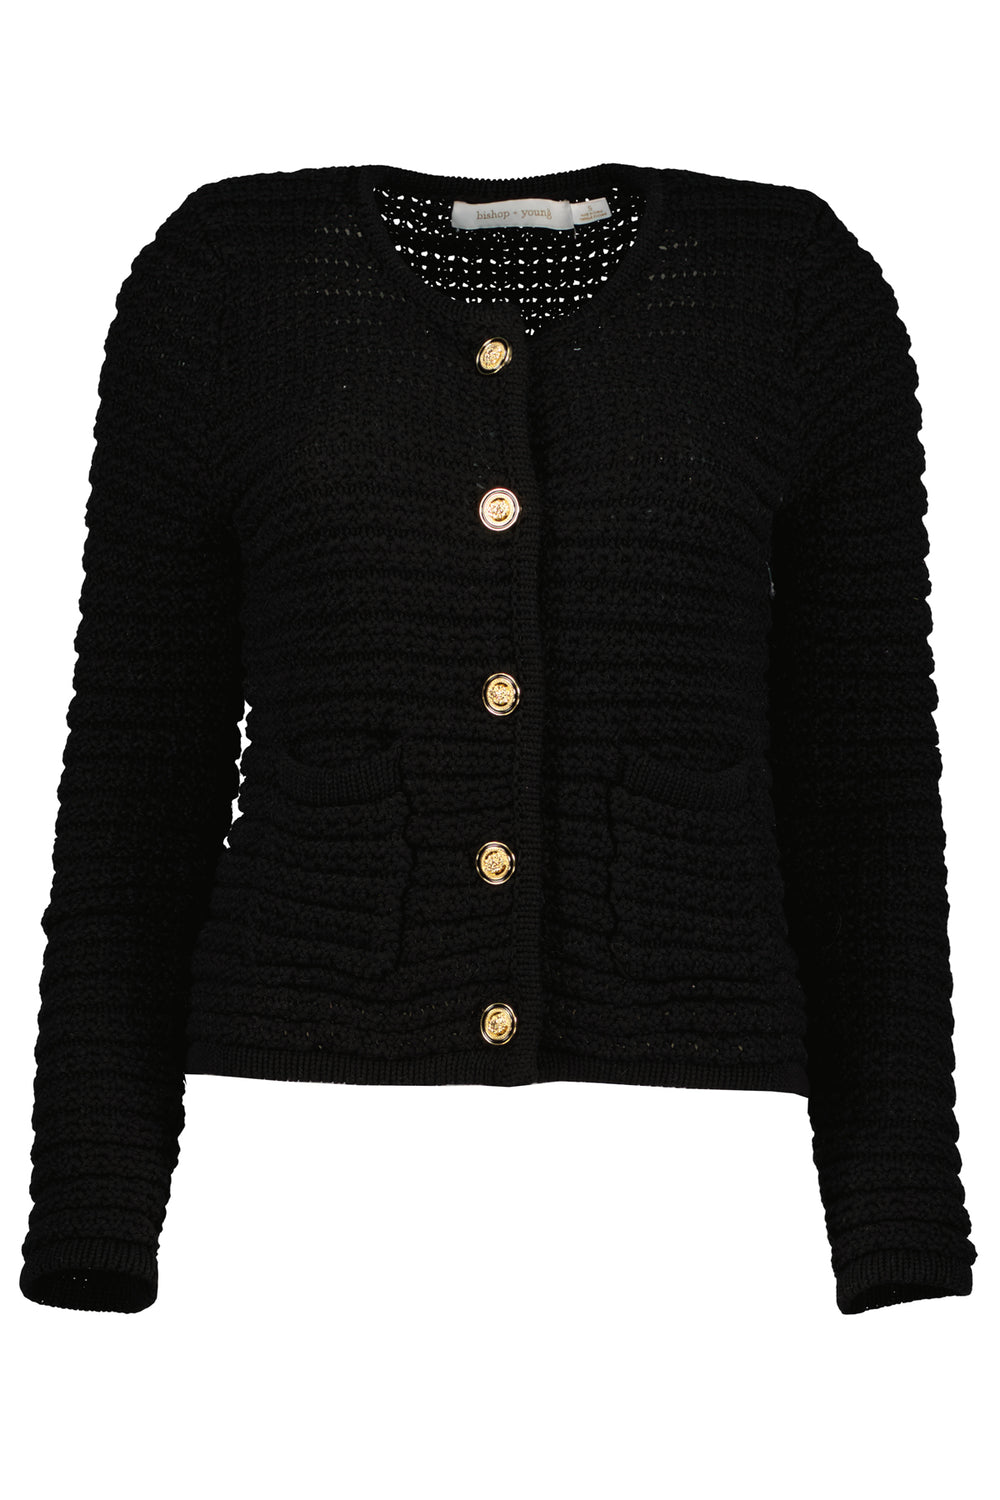 Black cardigan button down sweater by Bishop and Young - Tru Blue Boutique